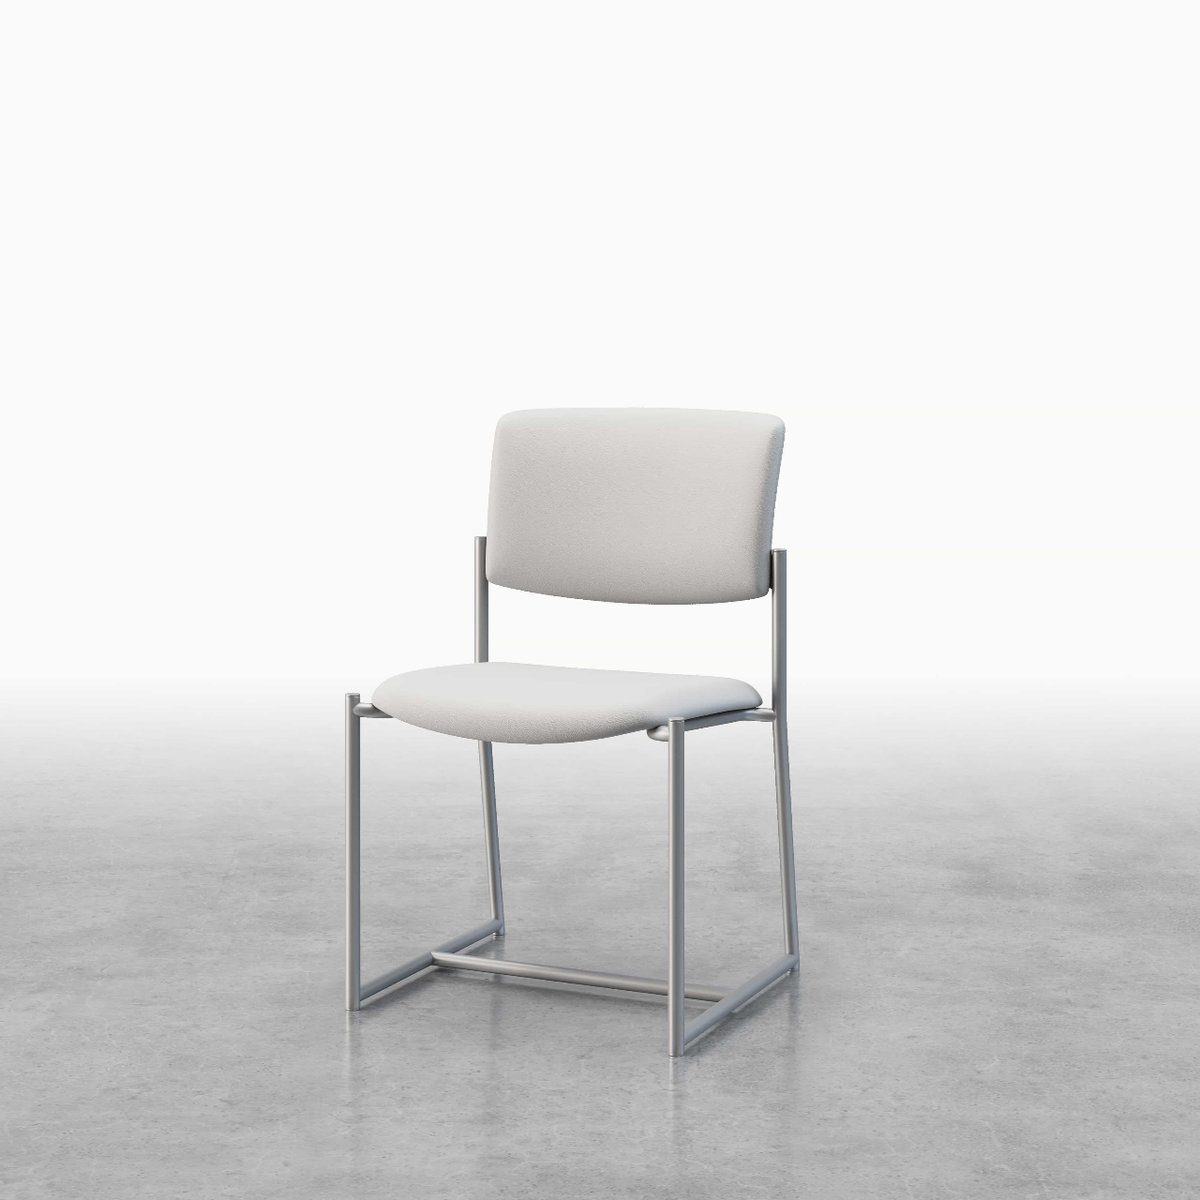 Stance BH Chair on clean background